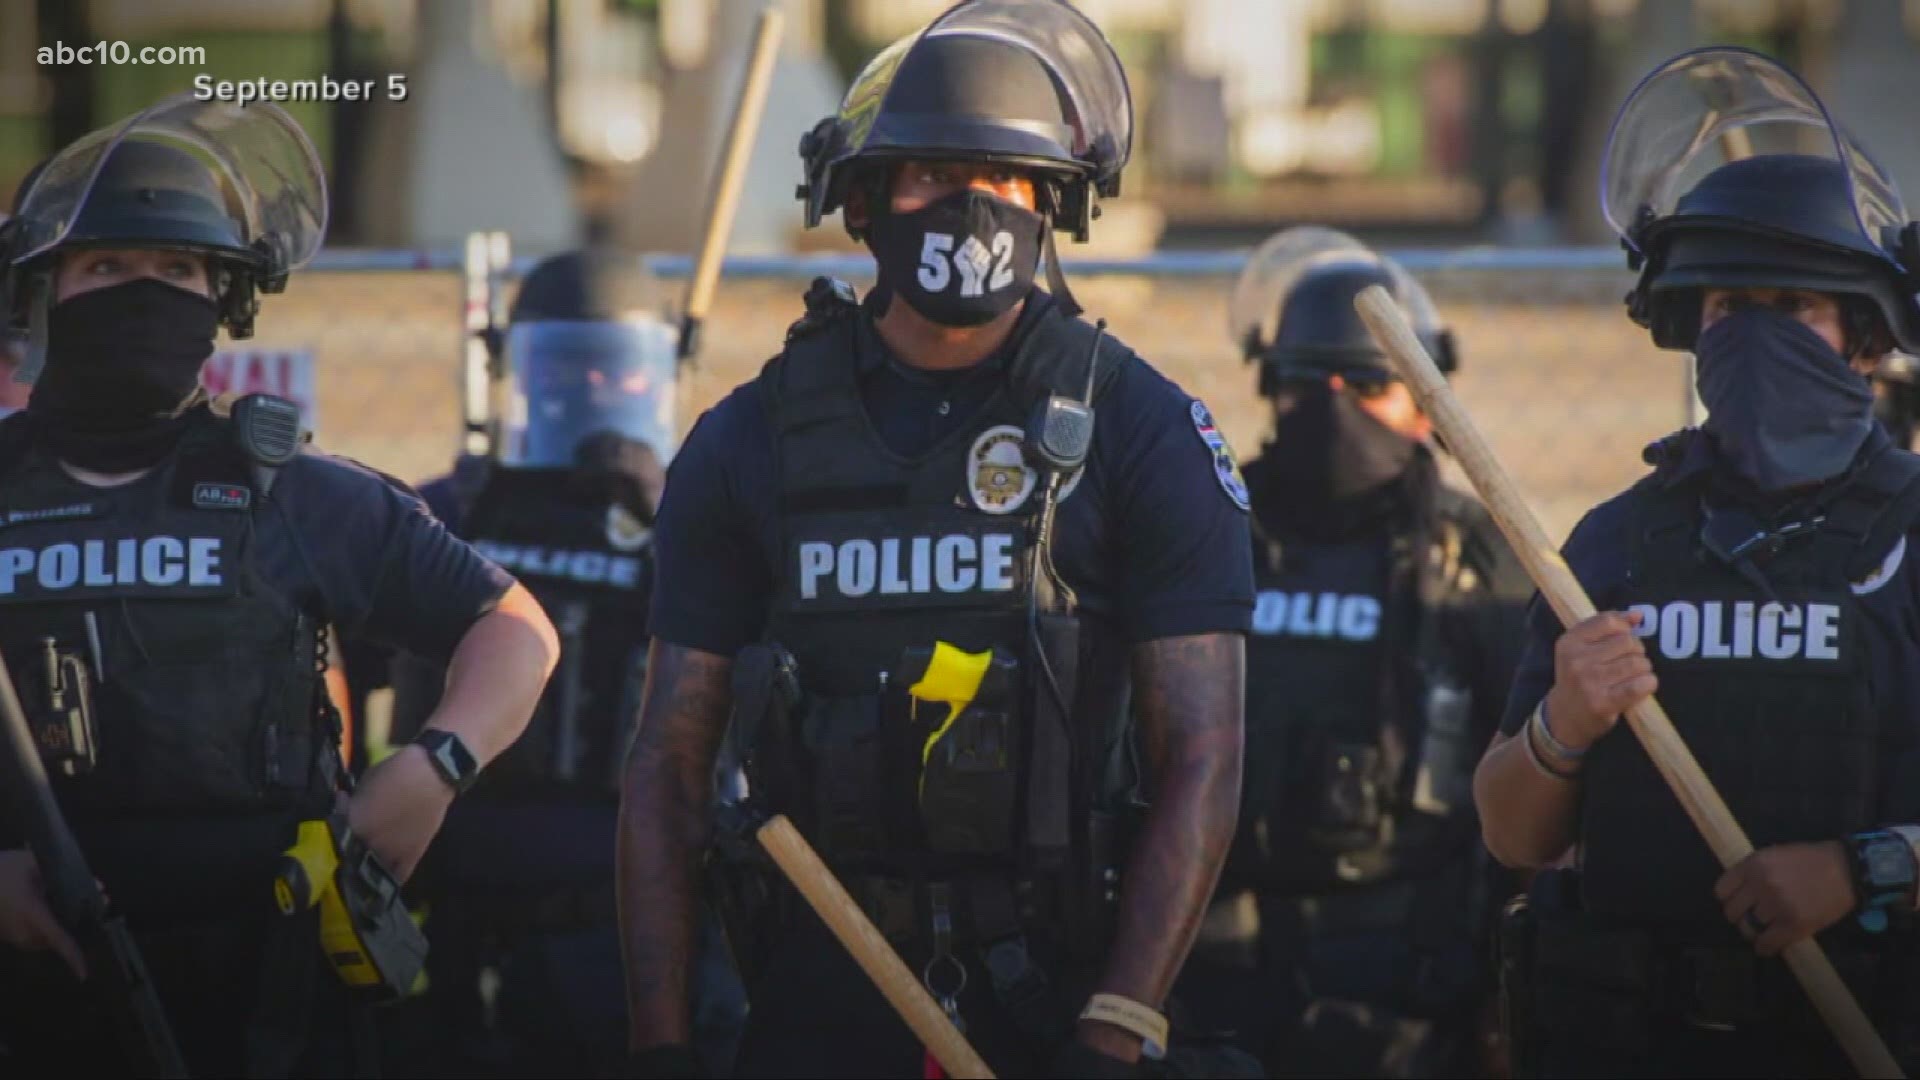 Activists react after multiple officers are fired for excessive force